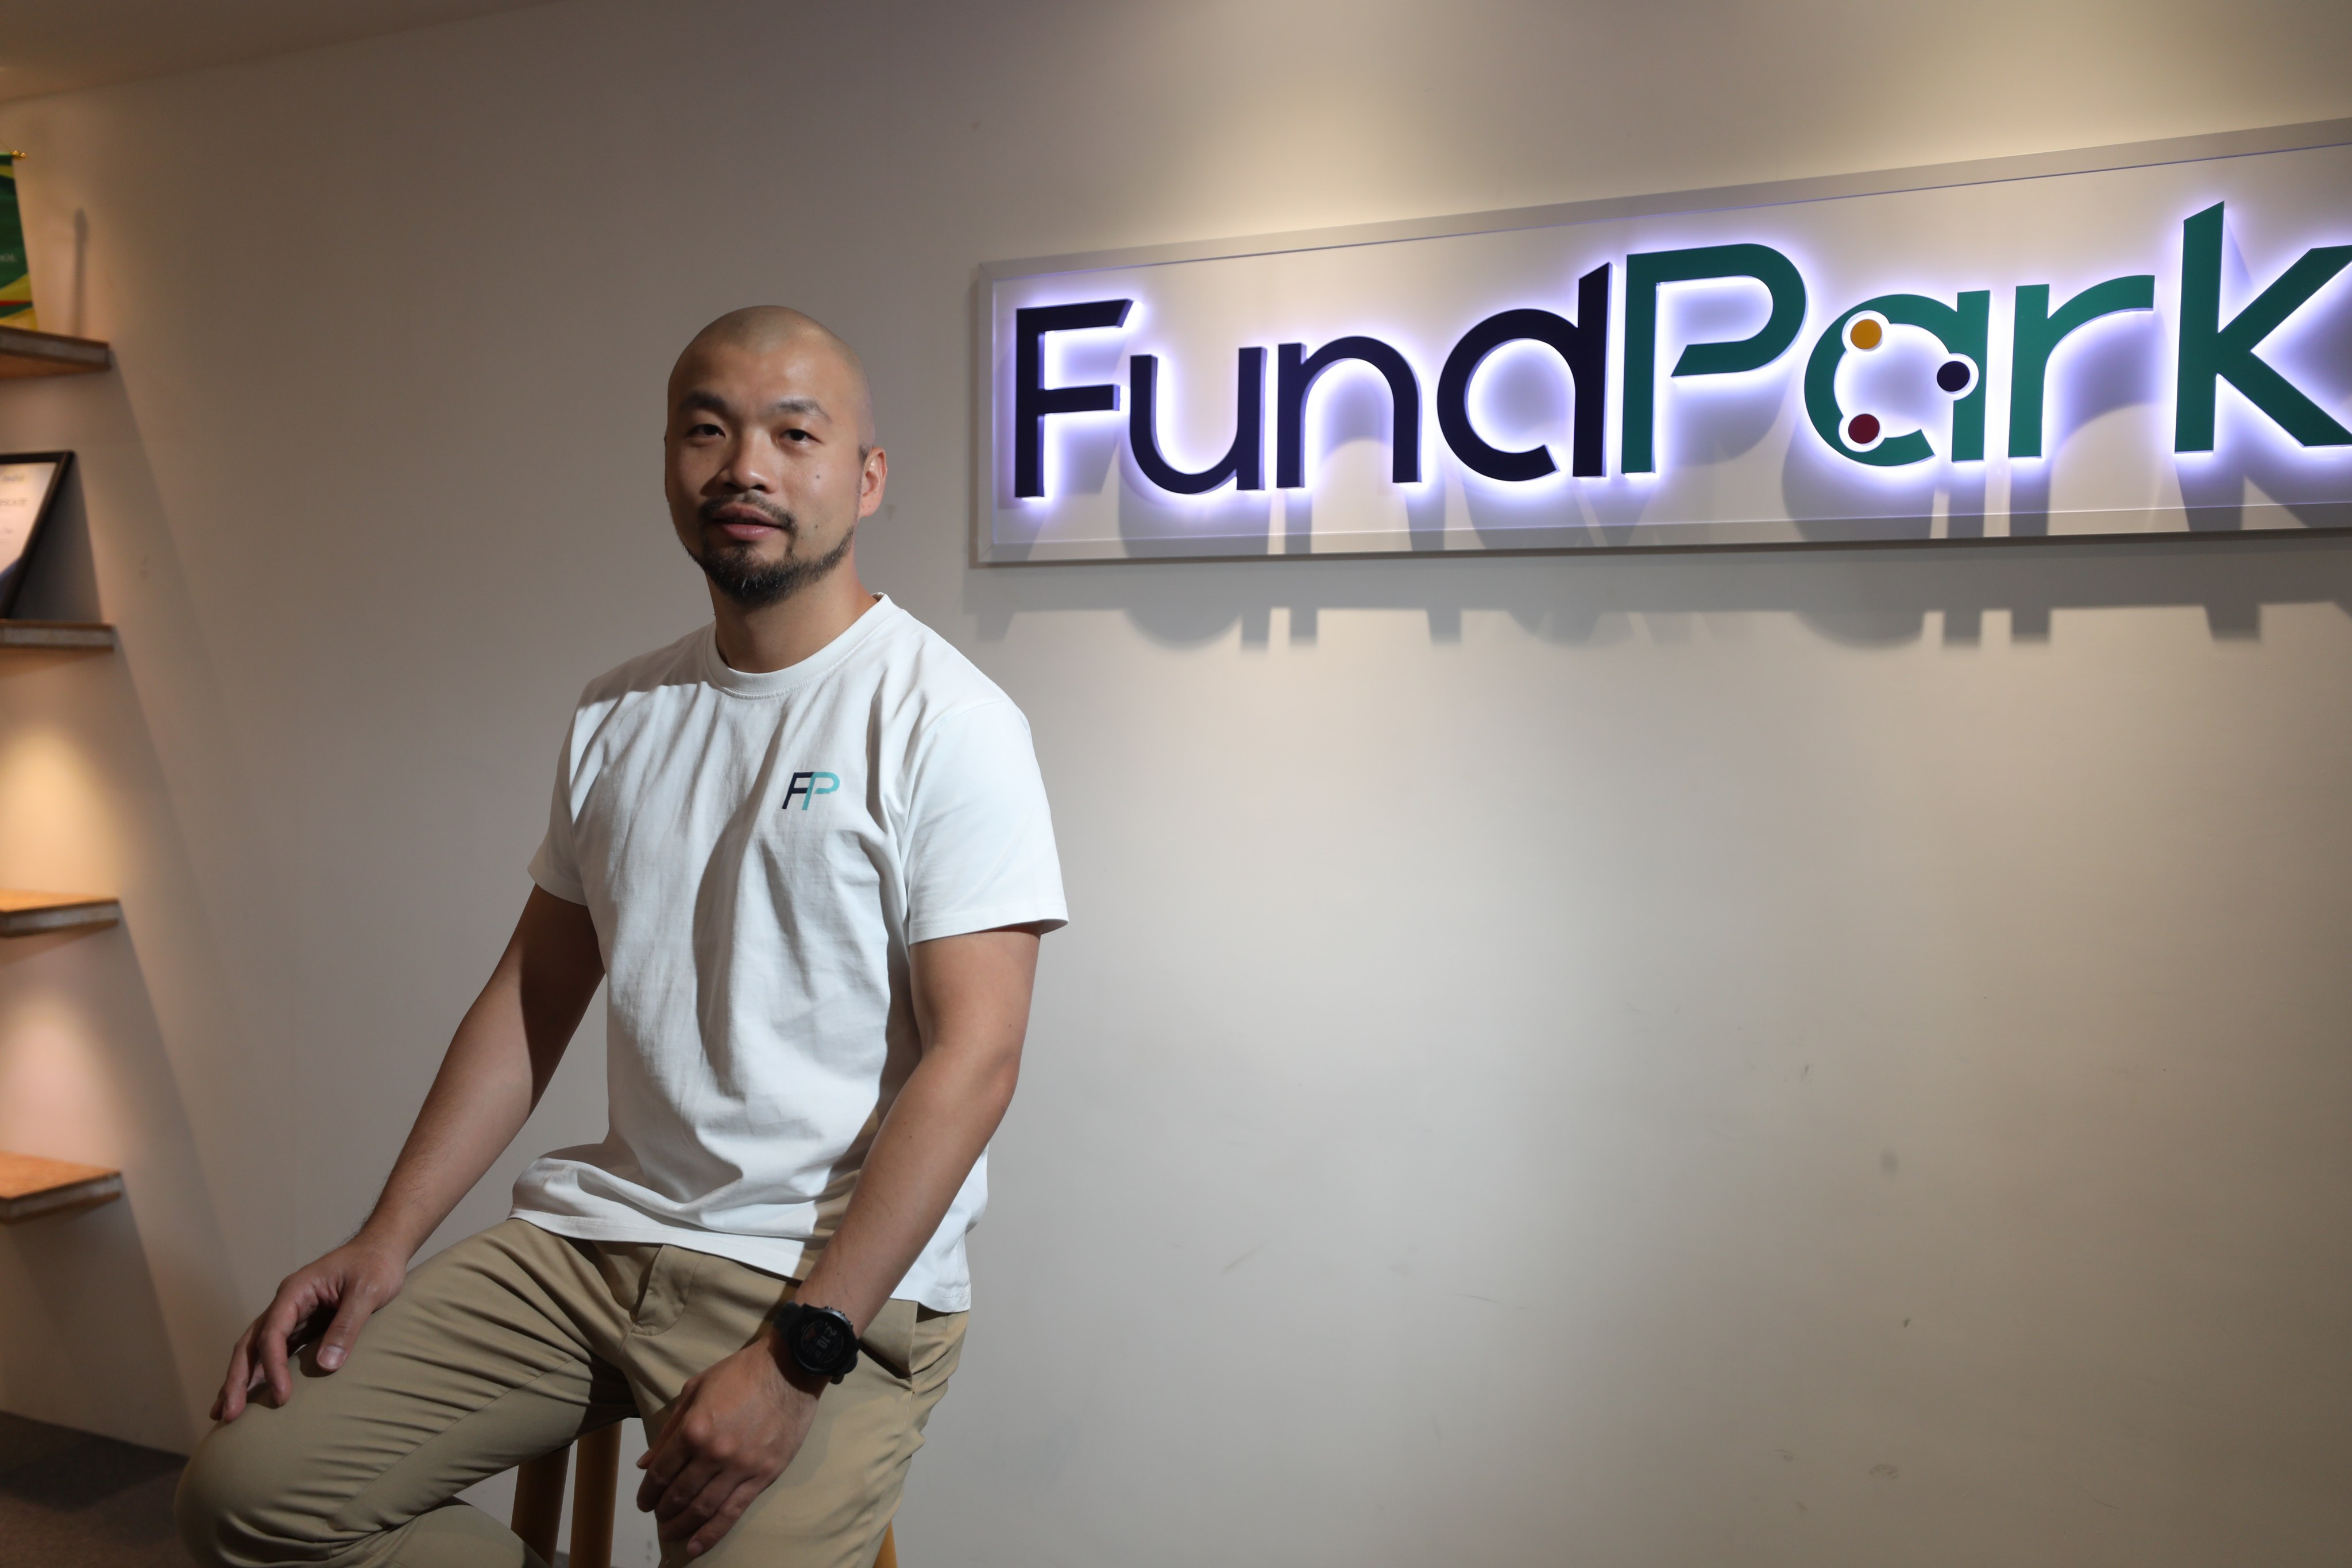 FundPark CEO and co-founder Anson Suen said the company will continue to upgrade its technological capabilities. Photo: Xiaomei Chen